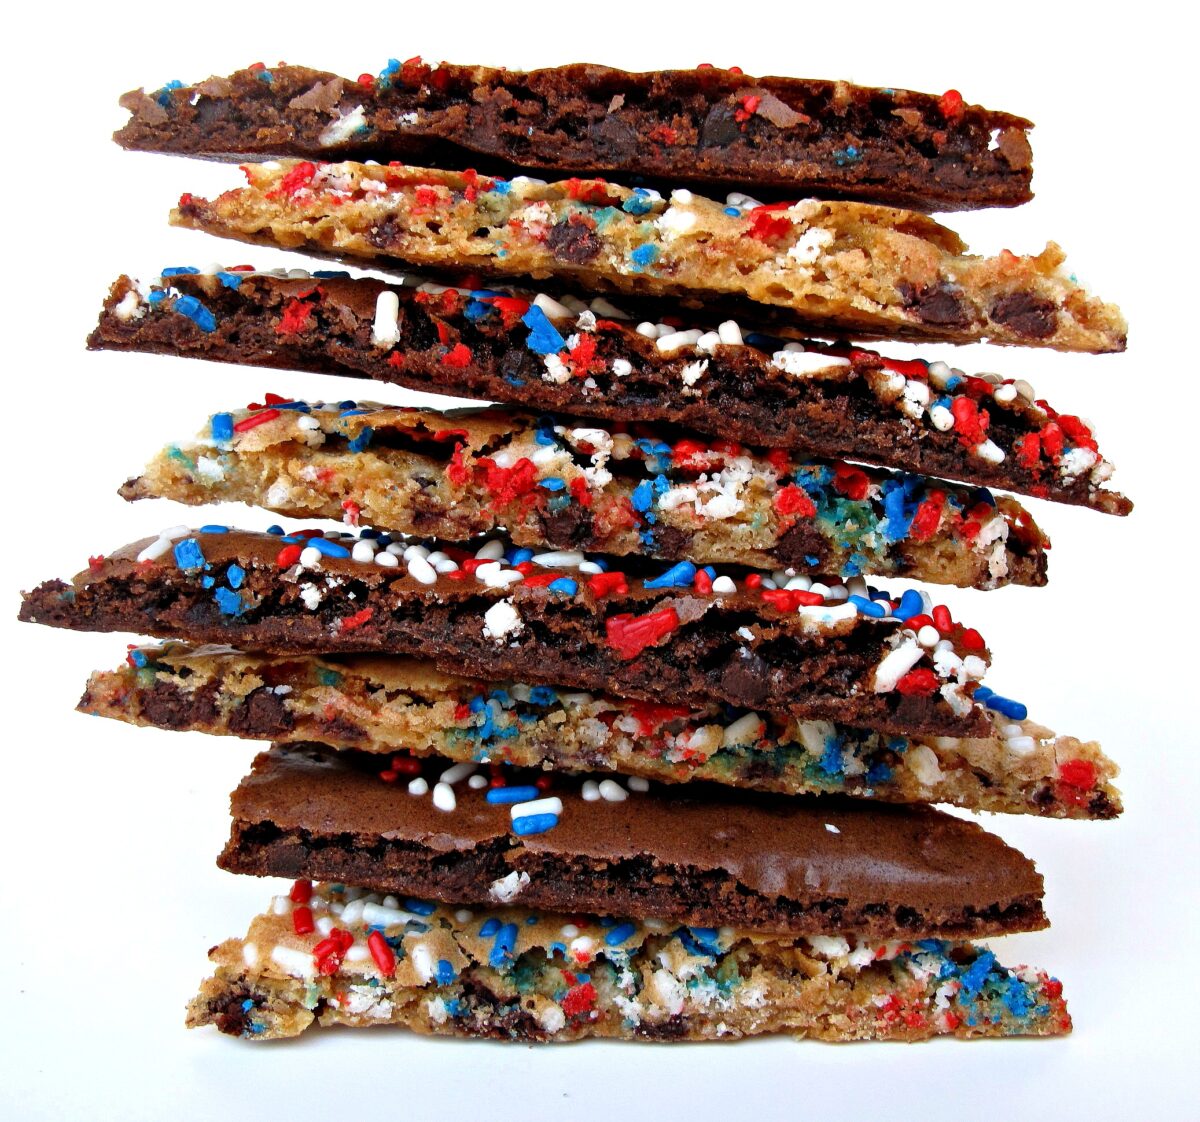 A stack of brownie and cookie brittle showing the thin, crispy cut edges.